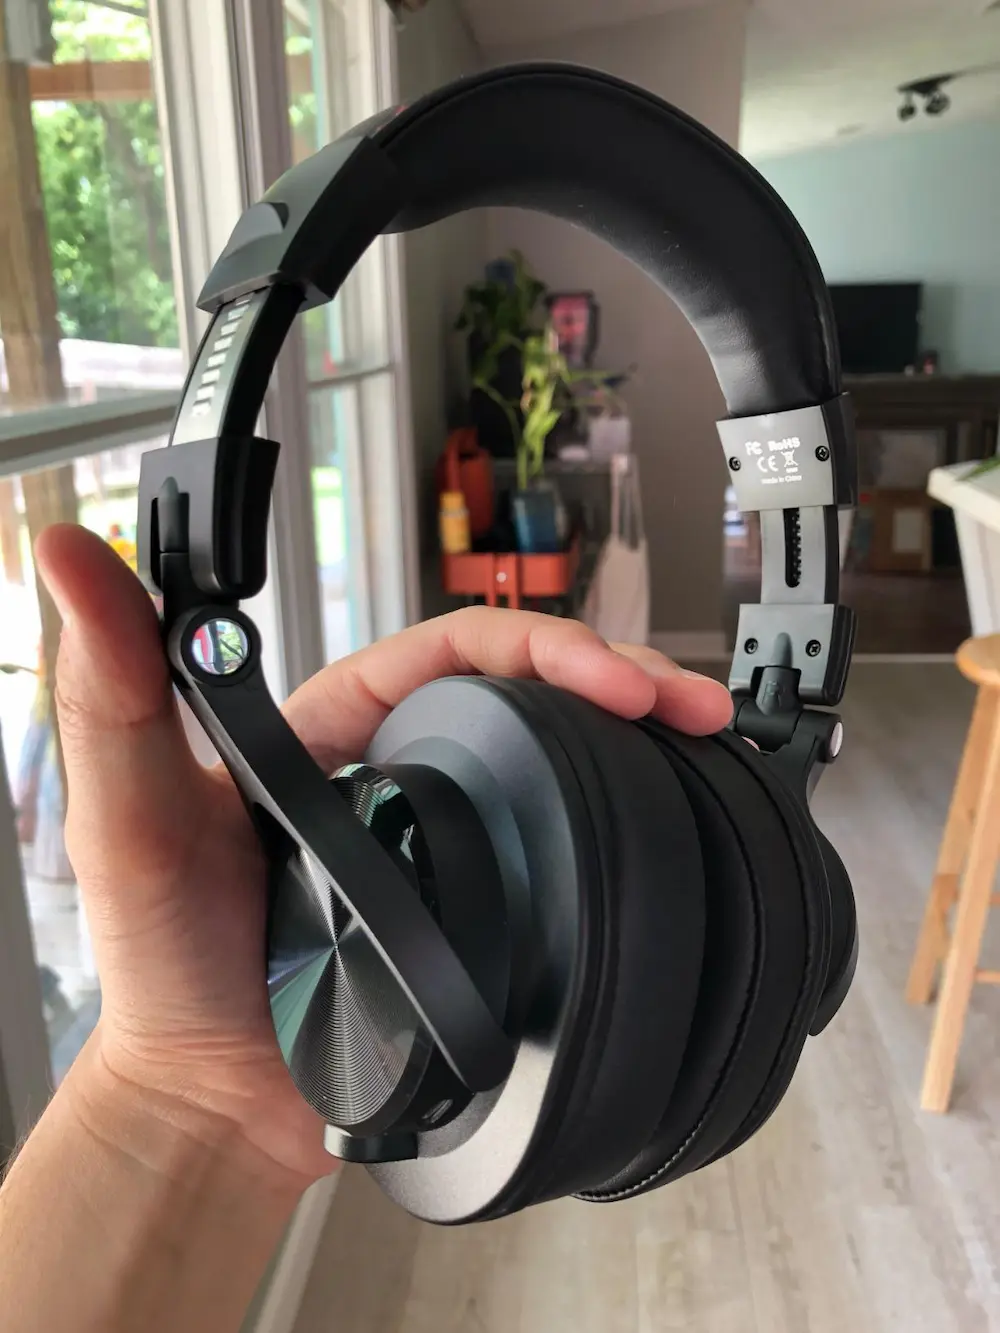 Is the OneOdio A70 headphones any good?